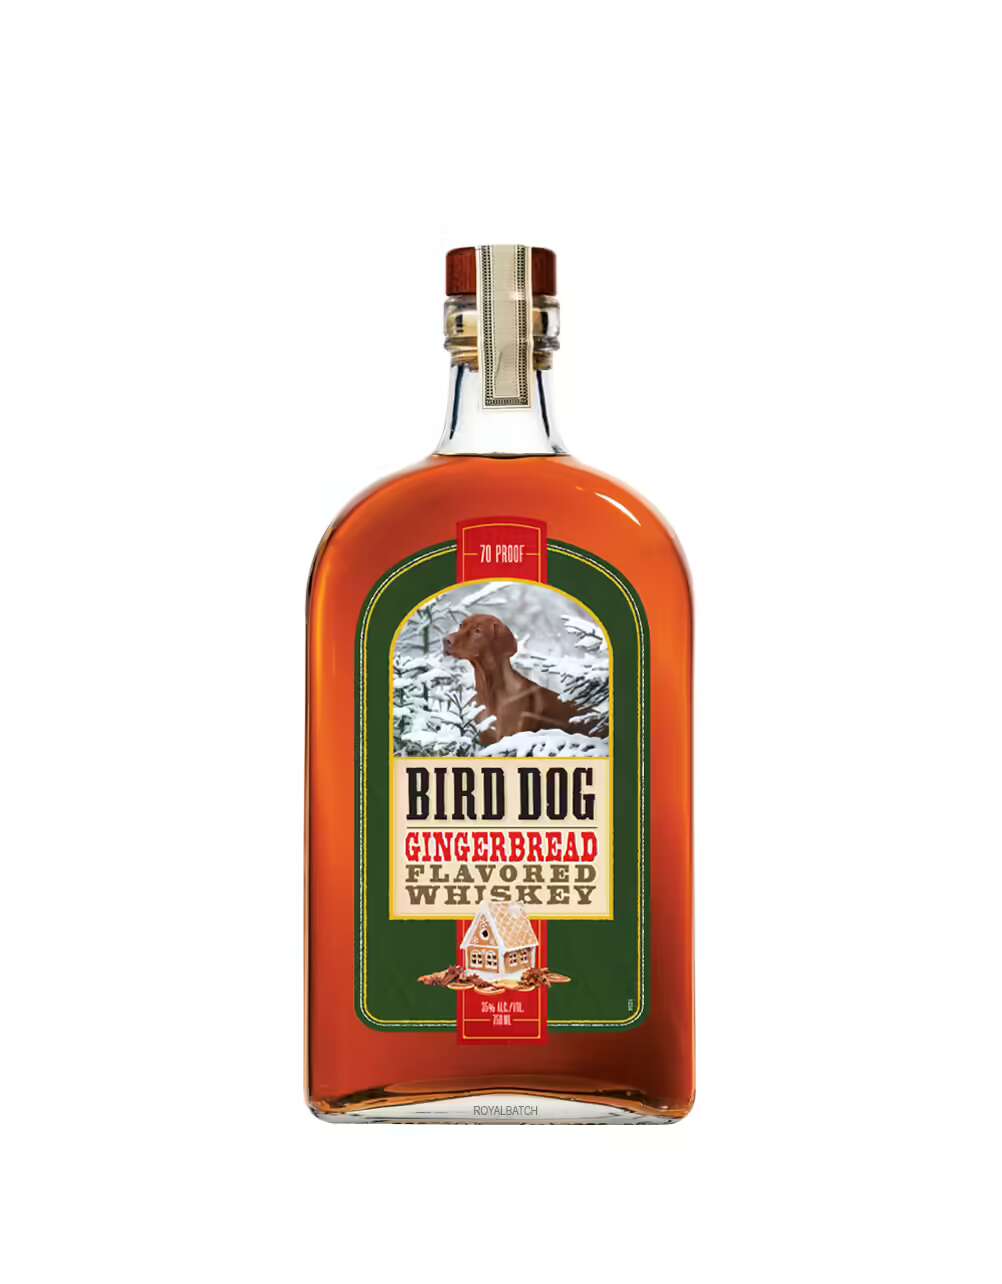 Bird Dog Gingerbread Flavored Whiskey